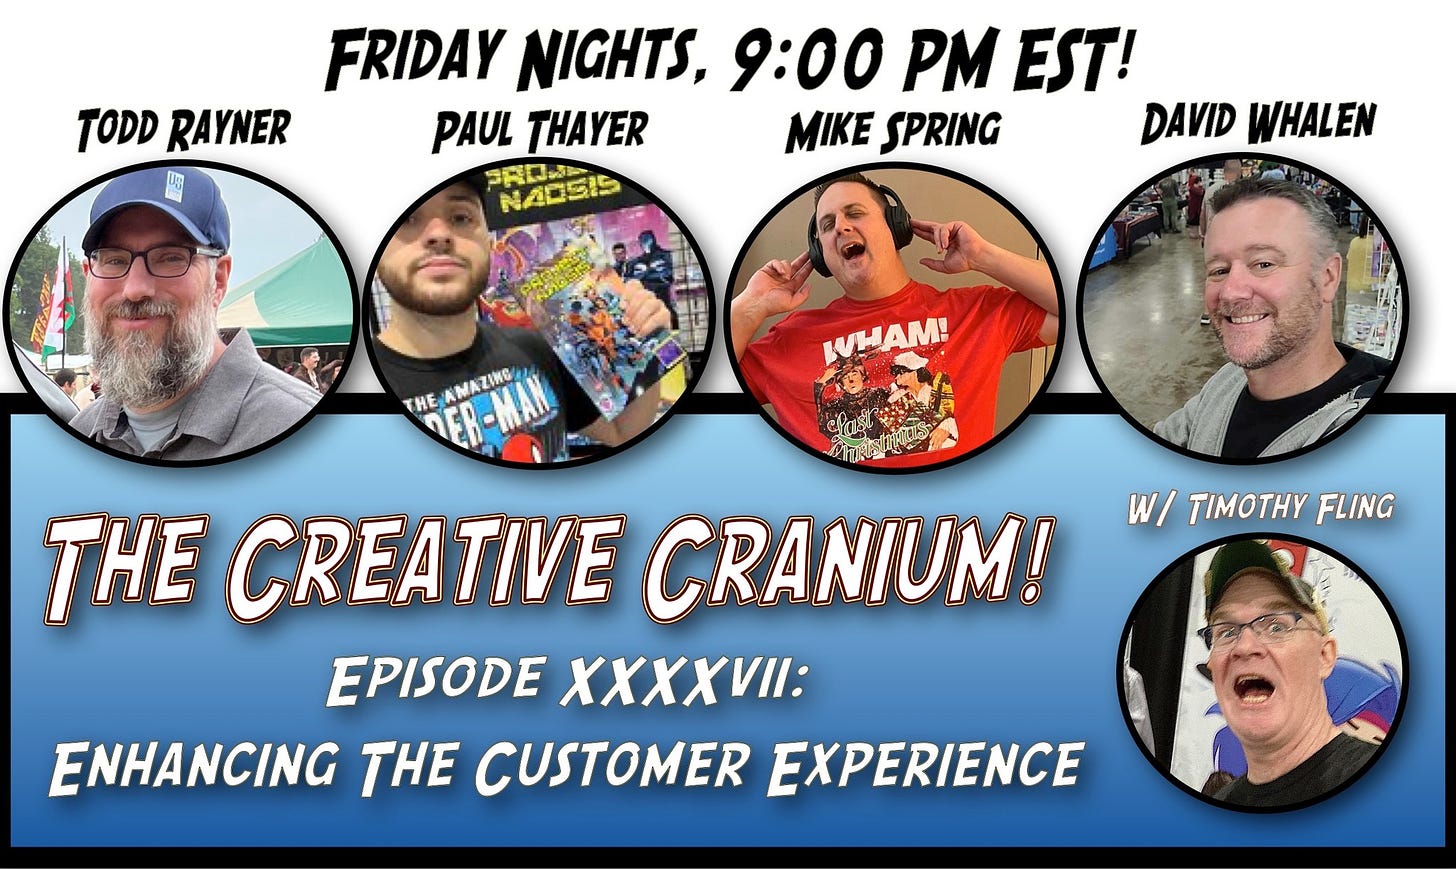 May be an image of 6 people and text that says "FRIDAY NIGHTS, 9:00 PM EST! TODD RAYNER PAUL THAYER MIKE SPRING DAVID WHALEN PROMA NADEIS THE VER-MAN MAZING WHAM W/ TIMOTHY FLING THE CREATIVE CRANIUM! EPISODE XXXXVII: ENHANCING THE CUSTOMER EXPERIENCE"